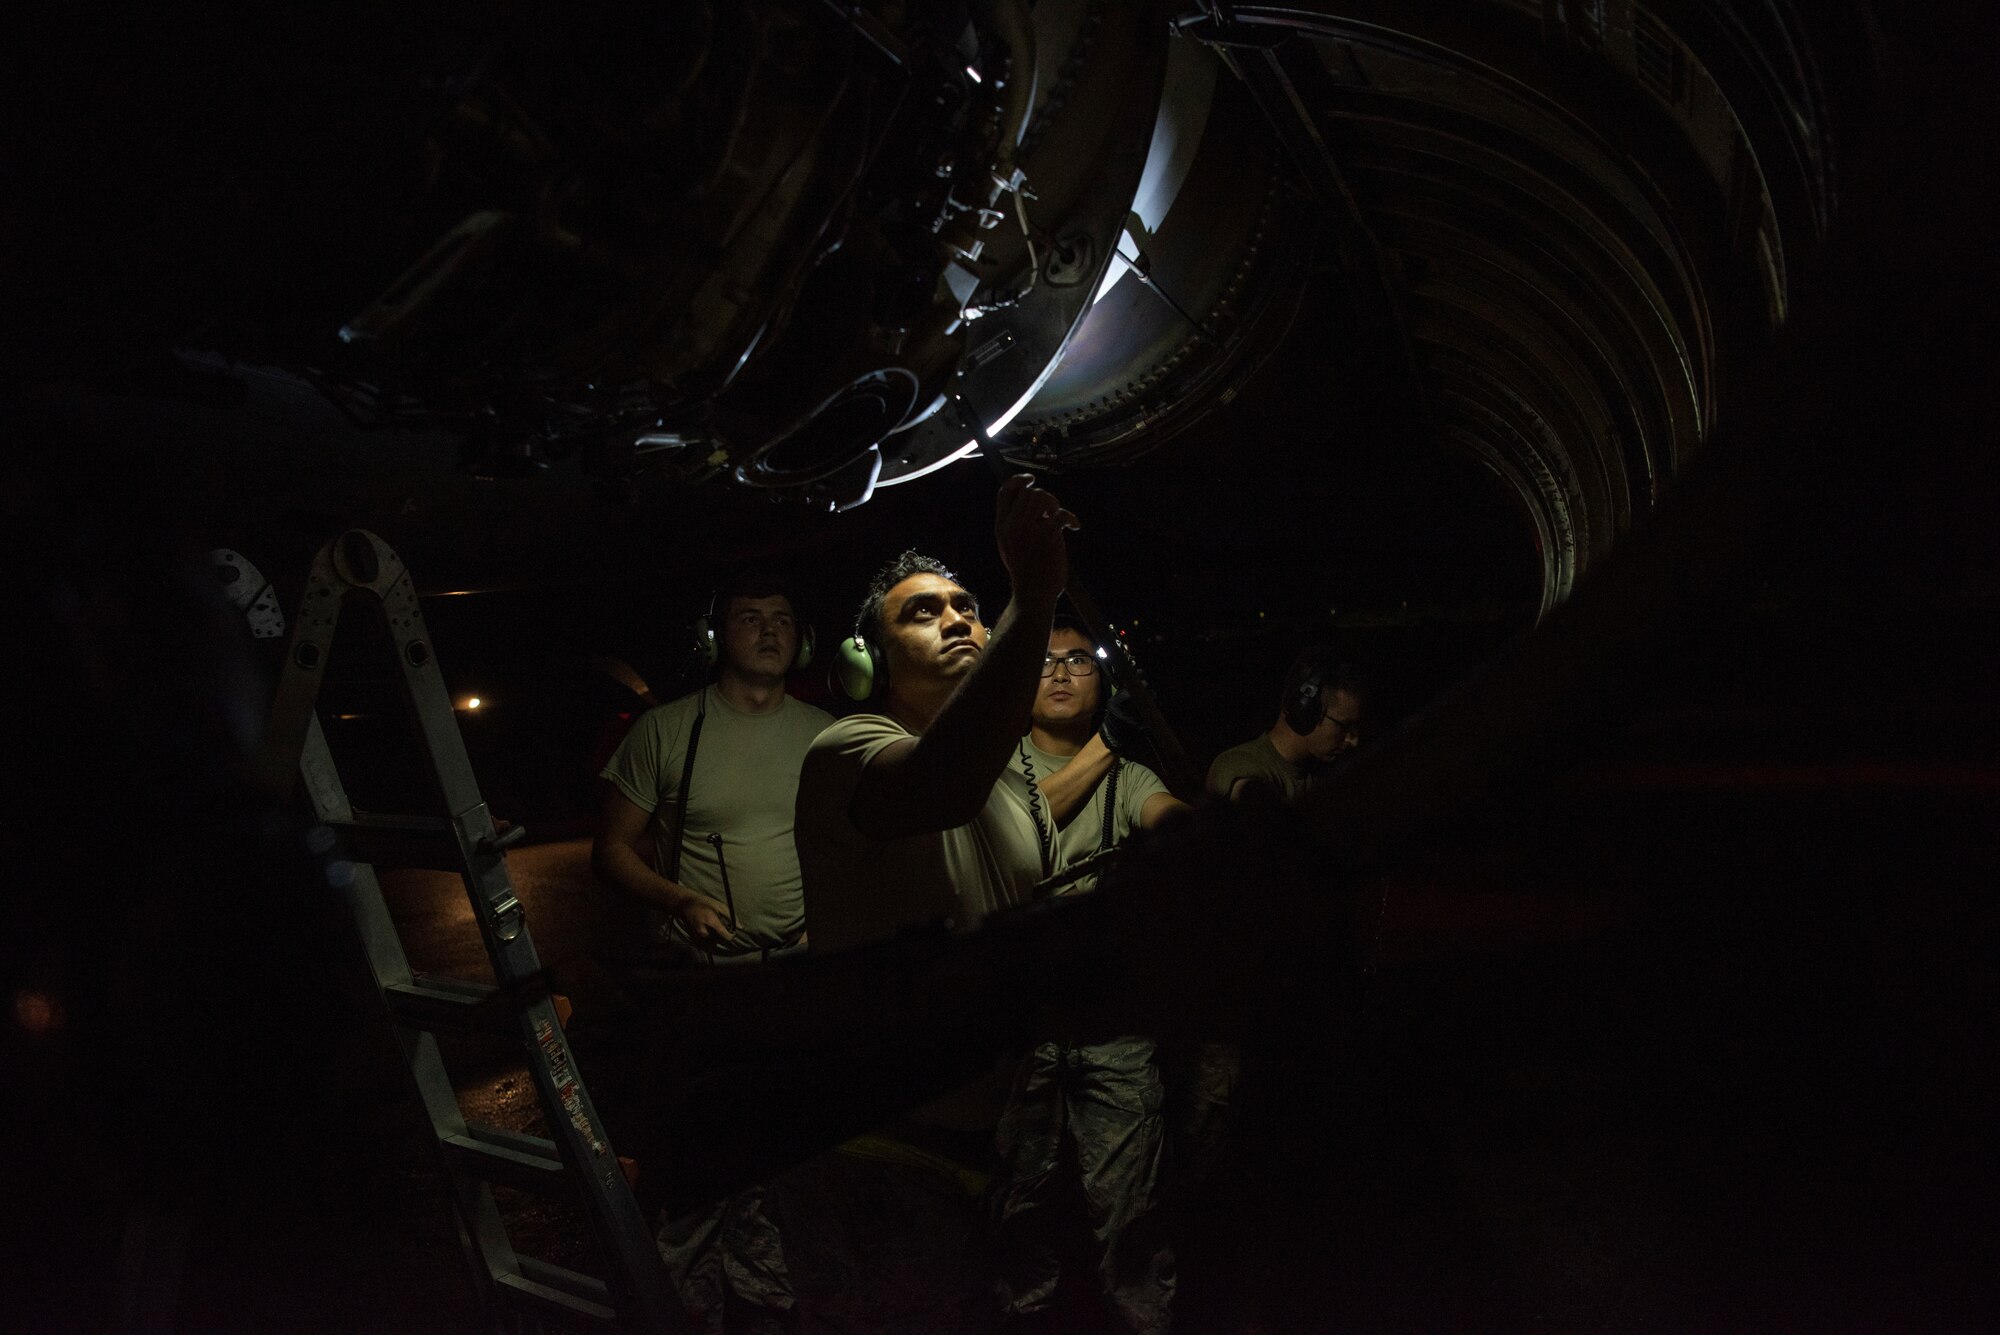 Airmen assigned to the 69th Aircraft Maintenance Squadron inspect a B-52H Stratofortress engine before a flight at Andersen Air Force Base, Guam, Feb. 3, 2020. Strategic bomber missions enhance the readiness and training necessary to respond to any potential crisis or challenge across the globe. (U.S. Air Force photo by Airman 1st Class Michael S. Murphy)